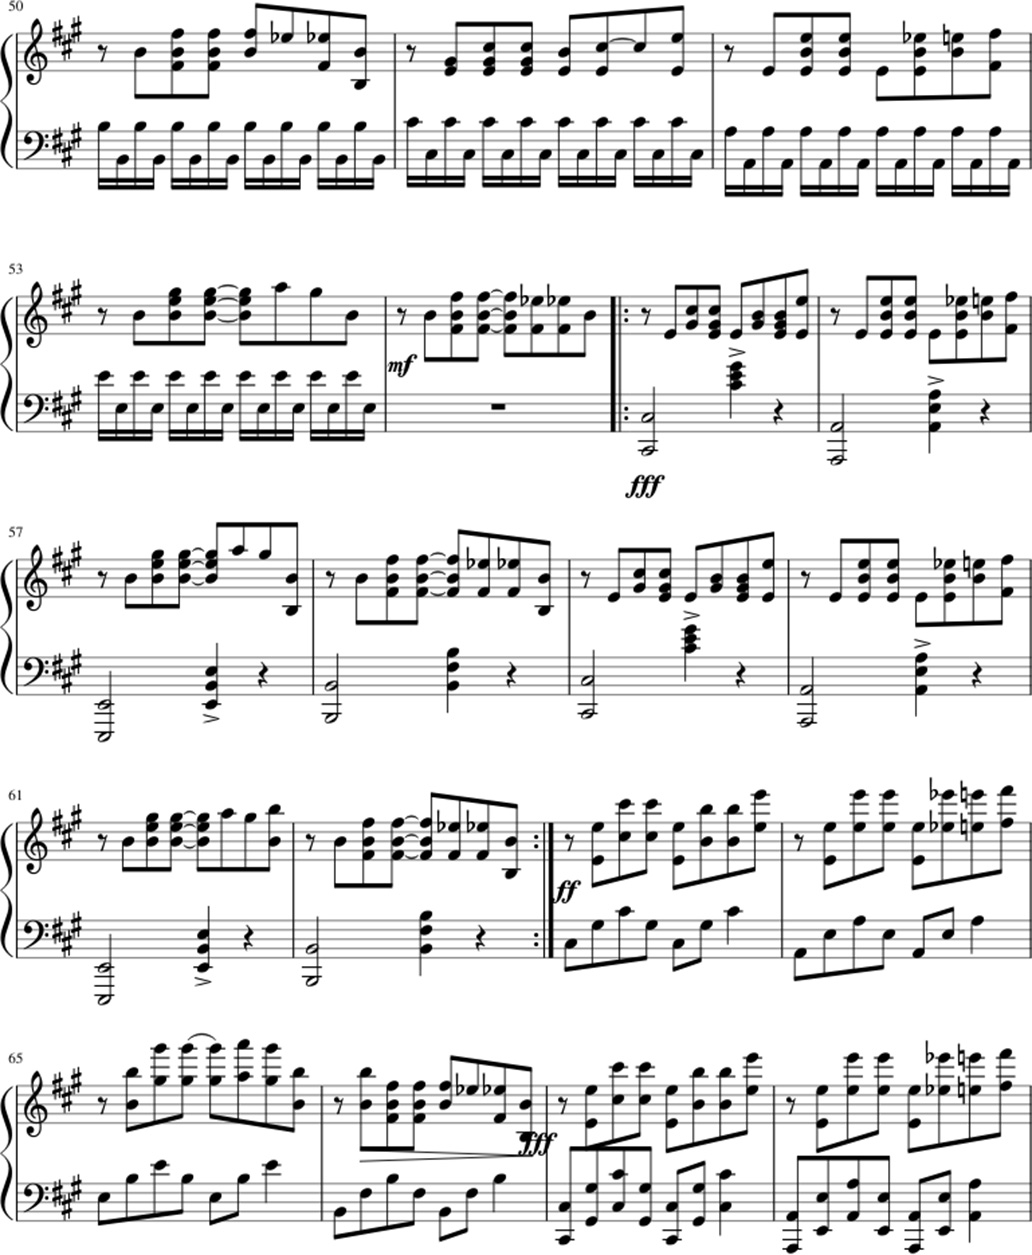 Force sheet music notes